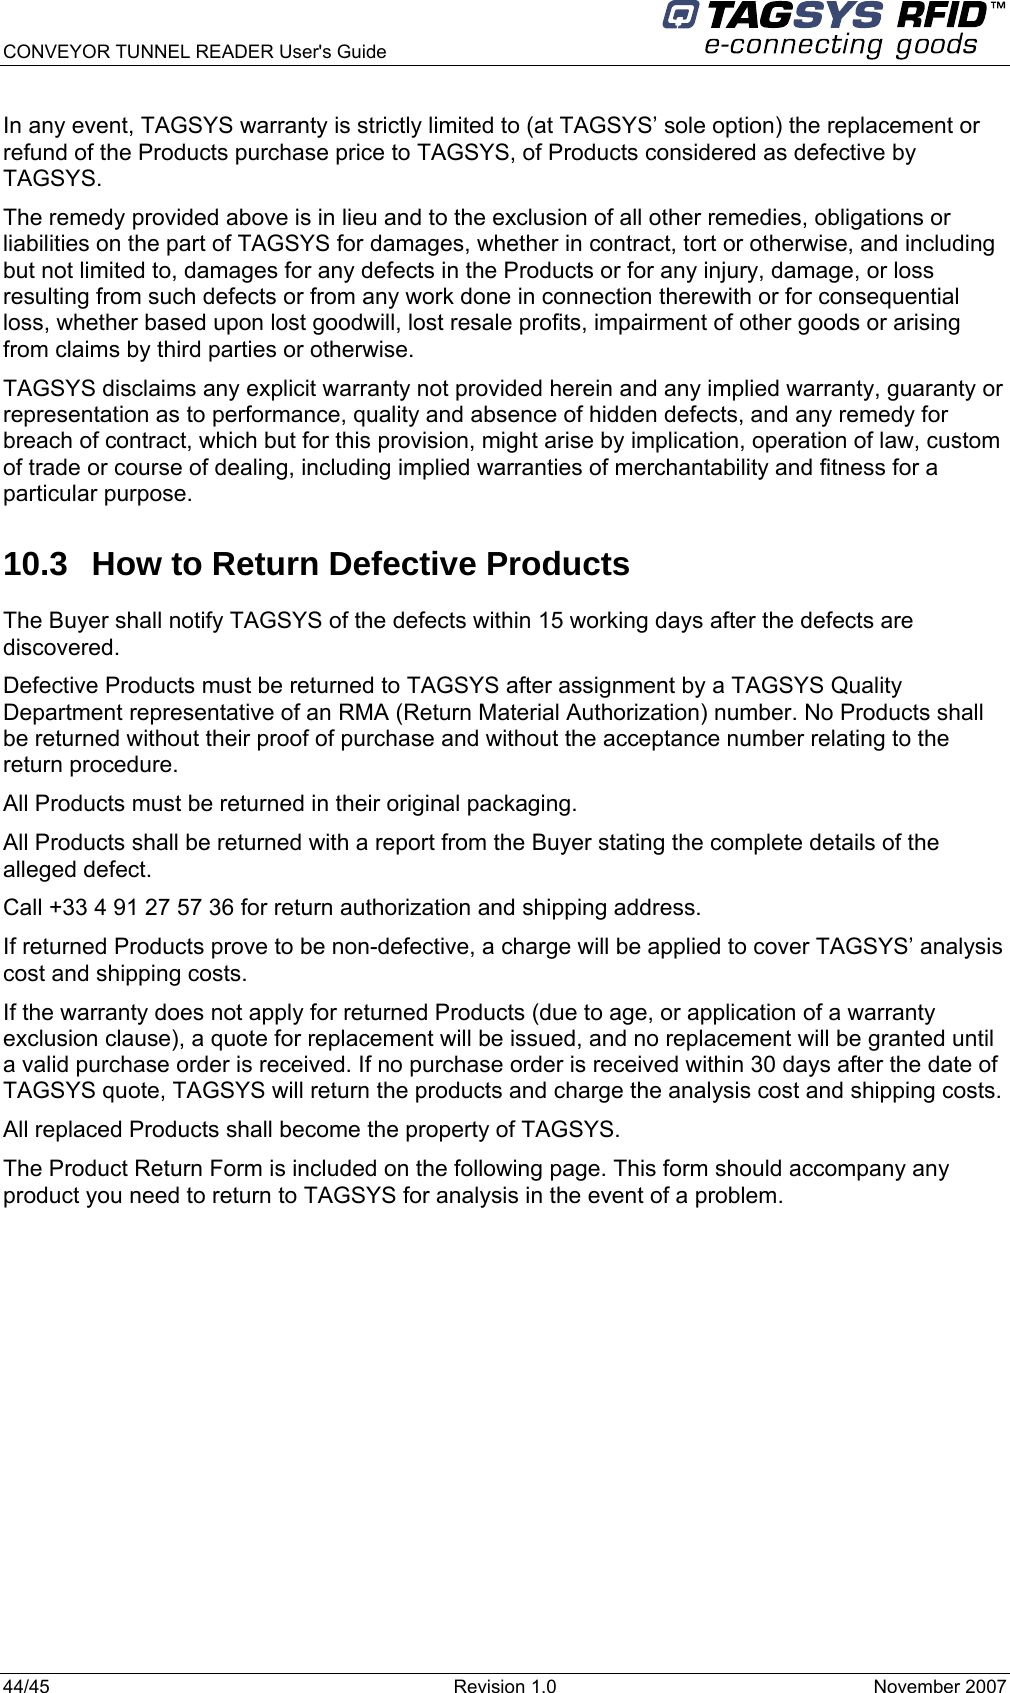  CONVEYOR TUNNEL READER User&apos;s Guide 44/45  Revision 1.0  November 2007  In any event, TAGSYS warranty is strictly limited to (at TAGSYS’ sole option) the replacement or refund of the Products purchase price to TAGSYS, of Products considered as defective by TAGSYS. The remedy provided above is in lieu and to the exclusion of all other remedies, obligations or liabilities on the part of TAGSYS for damages, whether in contract, tort or otherwise, and including but not limited to, damages for any defects in the Products or for any injury, damage, or loss resulting from such defects or from any work done in connection therewith or for consequential loss, whether based upon lost goodwill, lost resale profits, impairment of other goods or arising from claims by third parties or otherwise. TAGSYS disclaims any explicit warranty not provided herein and any implied warranty, guaranty or representation as to performance, quality and absence of hidden defects, and any remedy for breach of contract, which but for this provision, might arise by implication, operation of law, custom of trade or course of dealing, including implied warranties of merchantability and fitness for a particular purpose. 10.3  How to Return Defective Products The Buyer shall notify TAGSYS of the defects within 15 working days after the defects are discovered. Defective Products must be returned to TAGSYS after assignment by a TAGSYS Quality Department representative of an RMA (Return Material Authorization) number. No Products shall be returned without their proof of purchase and without the acceptance number relating to the return procedure. All Products must be returned in their original packaging. All Products shall be returned with a report from the Buyer stating the complete details of the alleged defect. Call +33 4 91 27 57 36 for return authorization and shipping address. If returned Products prove to be non-defective, a charge will be applied to cover TAGSYS’ analysis cost and shipping costs. If the warranty does not apply for returned Products (due to age, or application of a warranty exclusion clause), a quote for replacement will be issued, and no replacement will be granted until a valid purchase order is received. If no purchase order is received within 30 days after the date of TAGSYS quote, TAGSYS will return the products and charge the analysis cost and shipping costs. All replaced Products shall become the property of TAGSYS. The Product Return Form is included on the following page. This form should accompany any product you need to return to TAGSYS for analysis in the event of a problem. 